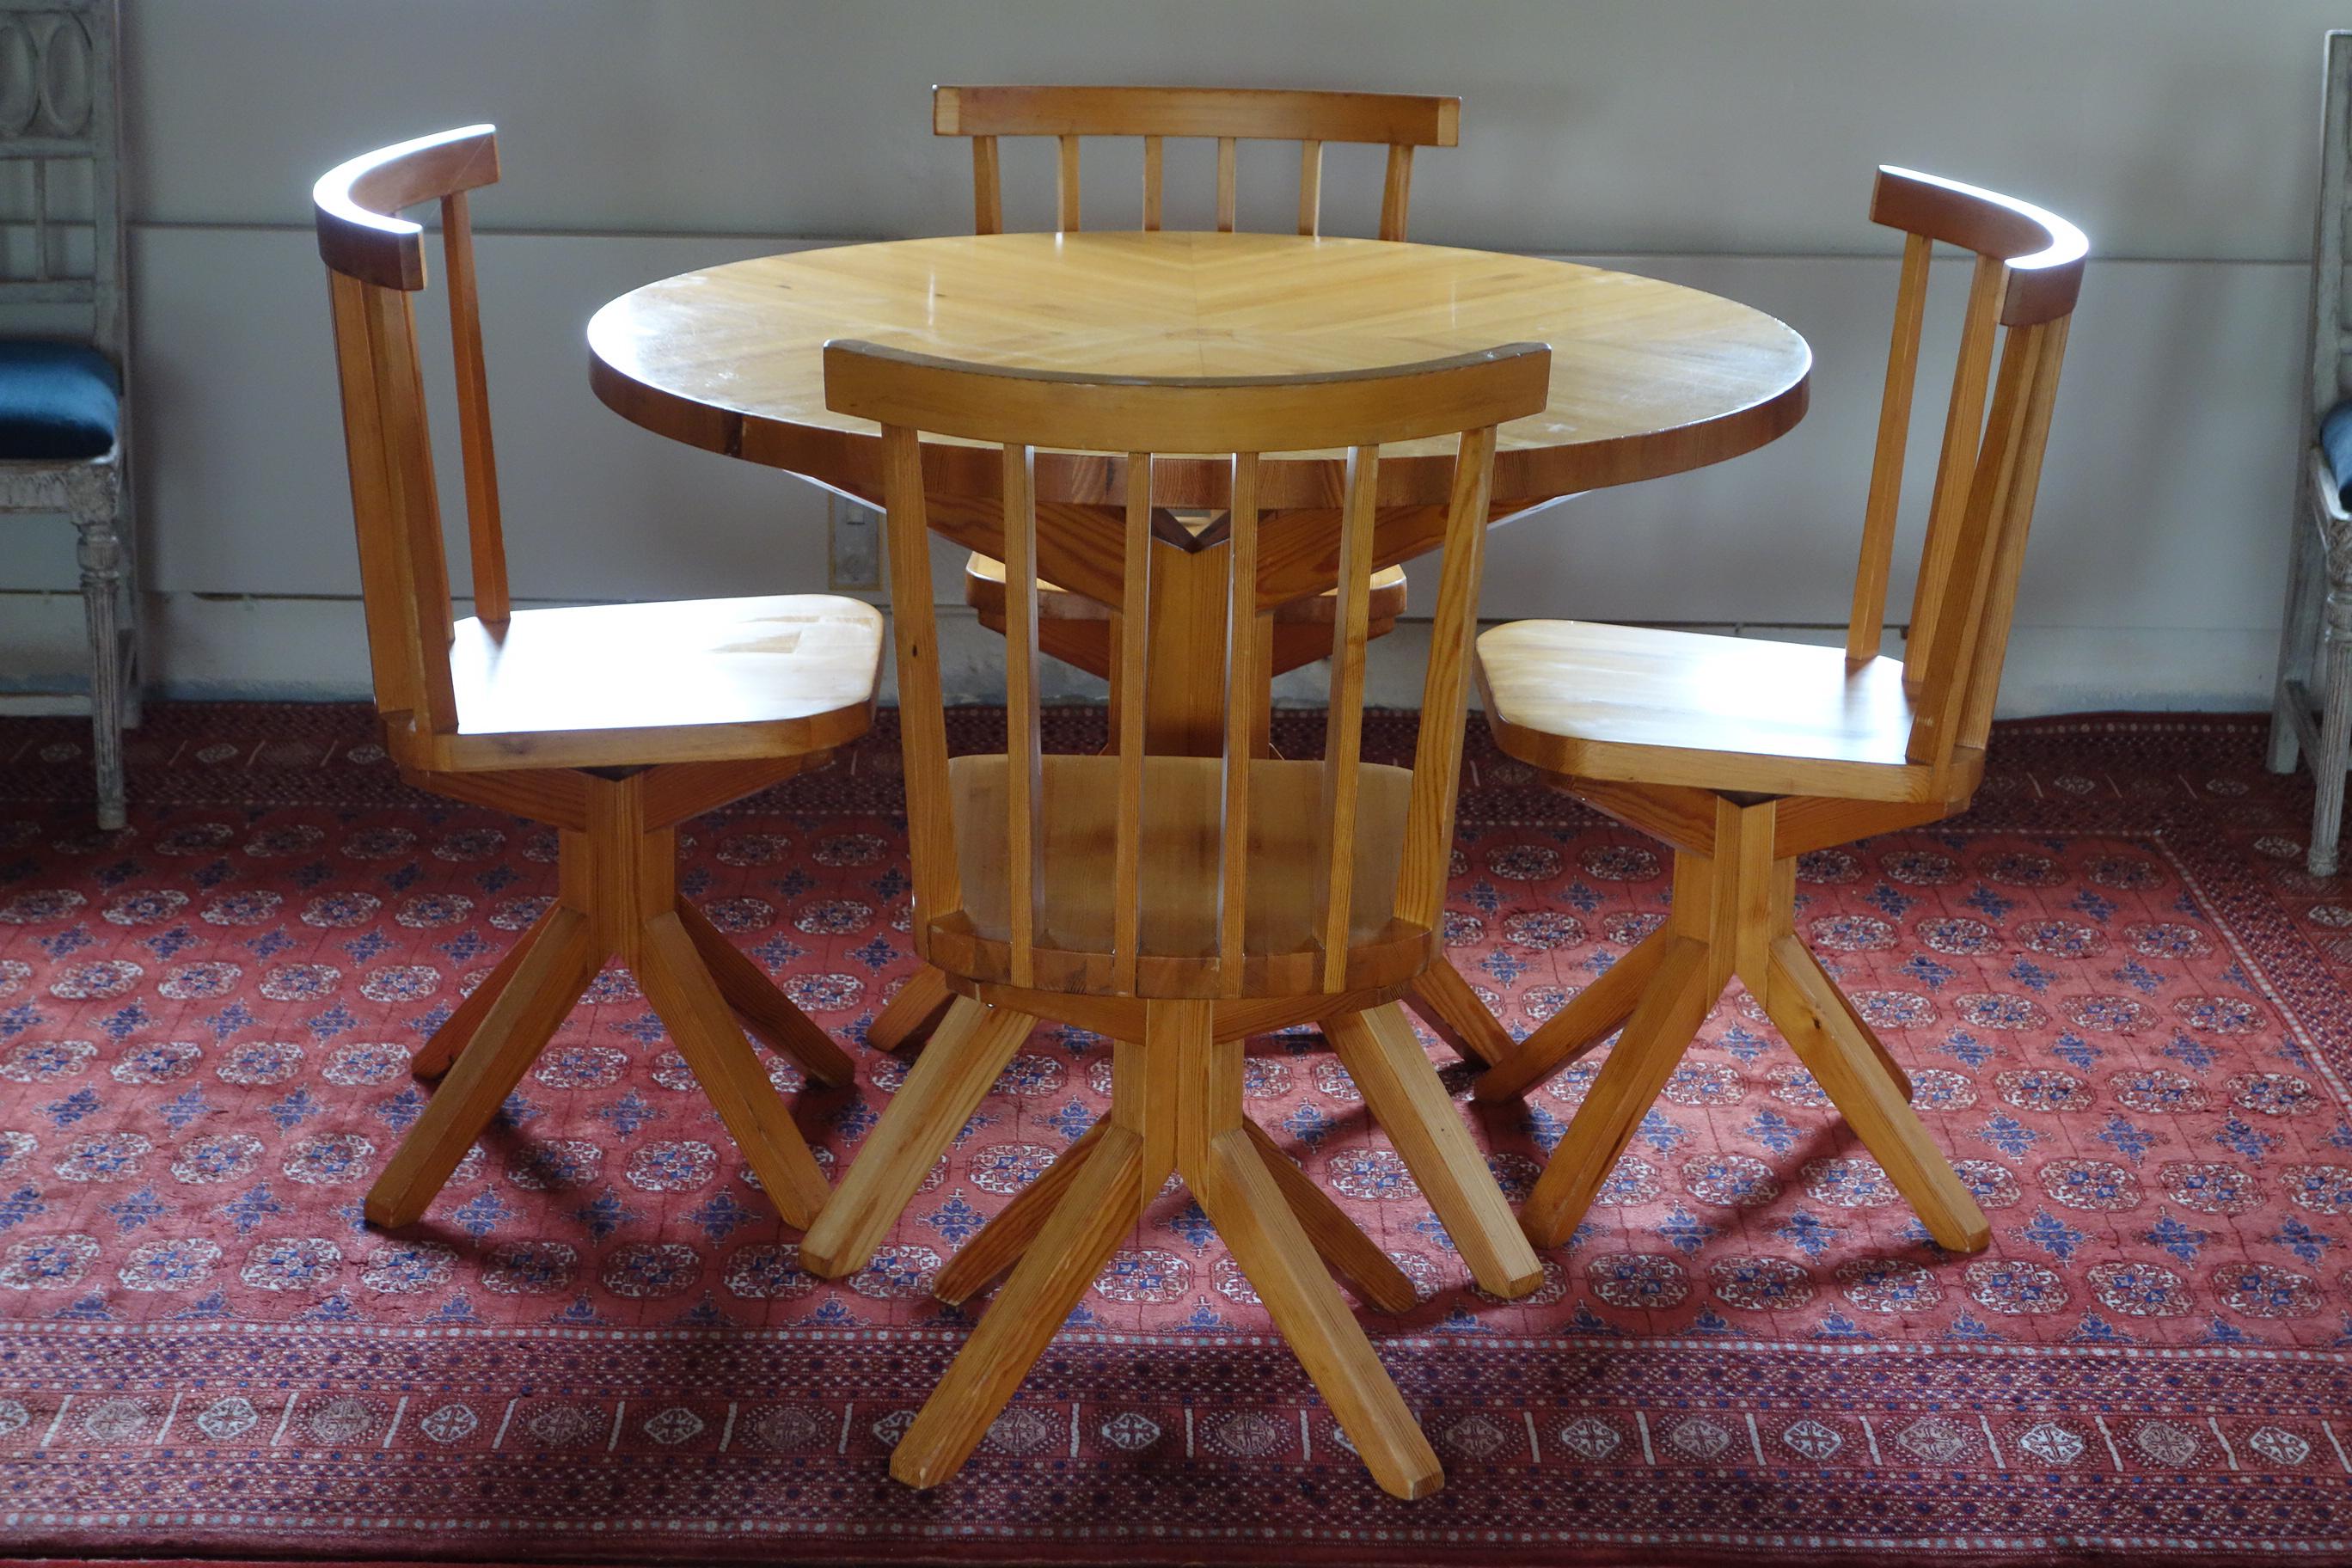 Presumably unique spider dining set made by a master carpenter. Made of solid pine with a star-shaped table top.